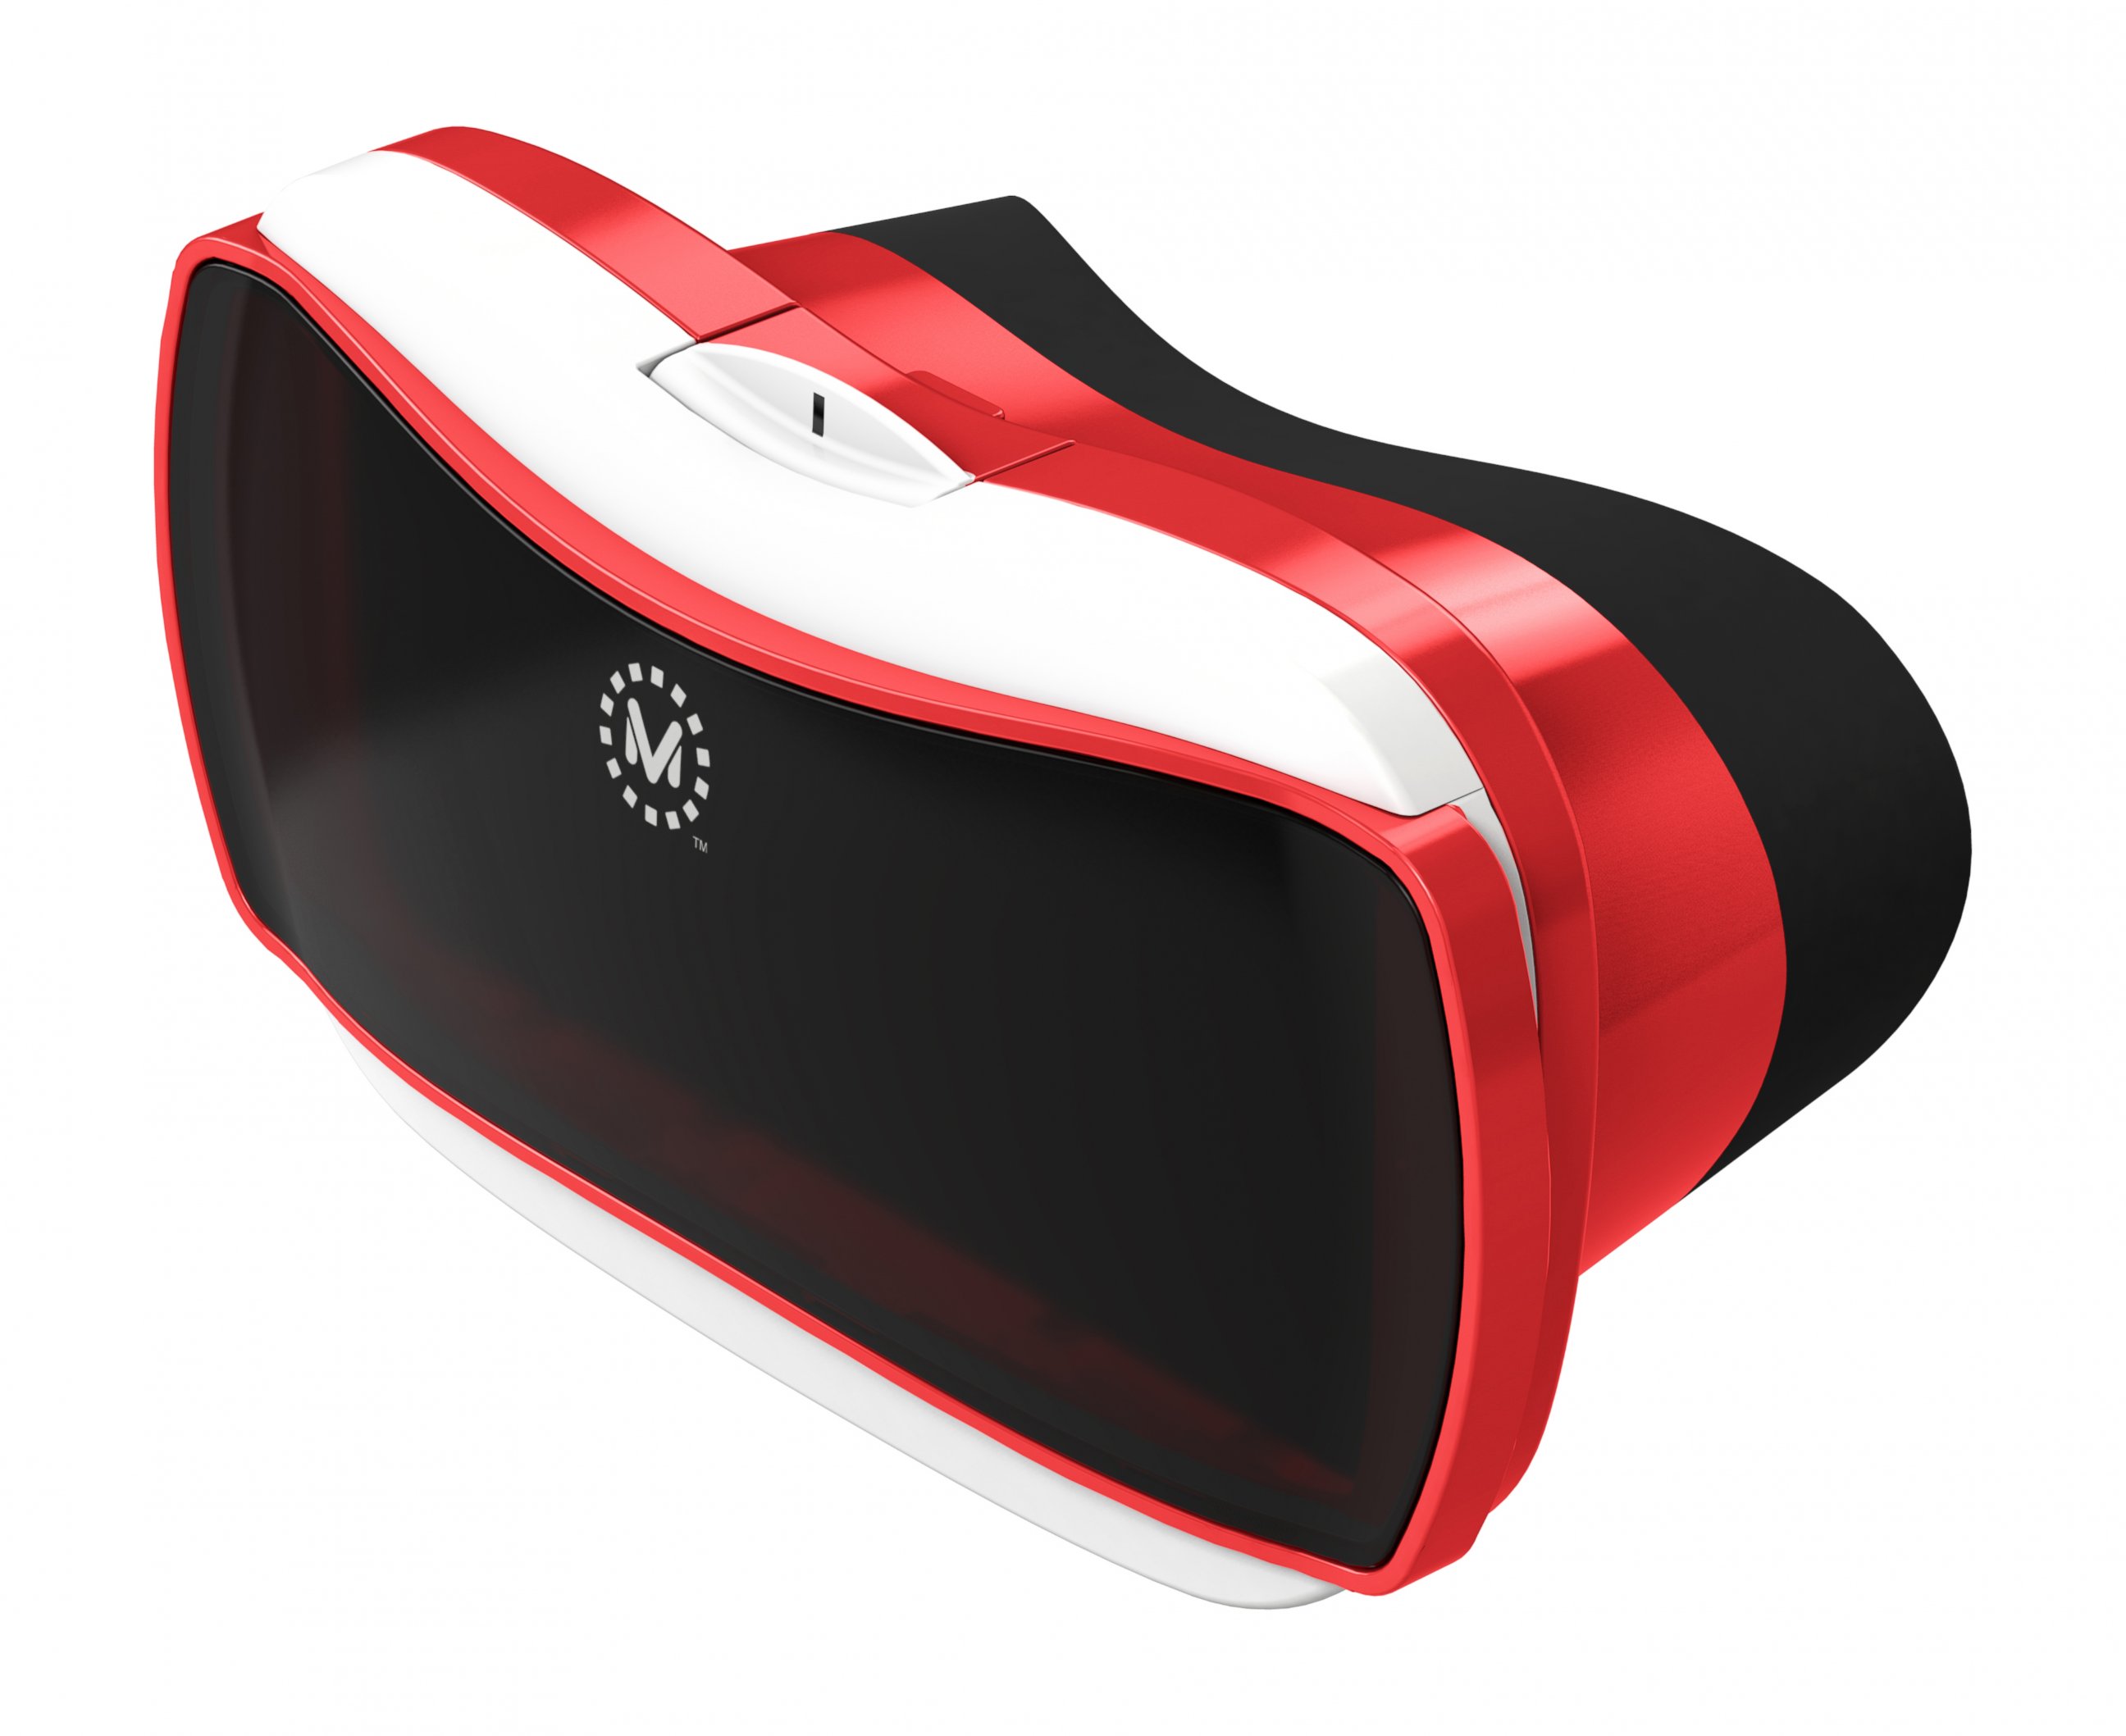 The View-Master Reimagined as a VR Headset - Newegg Insider